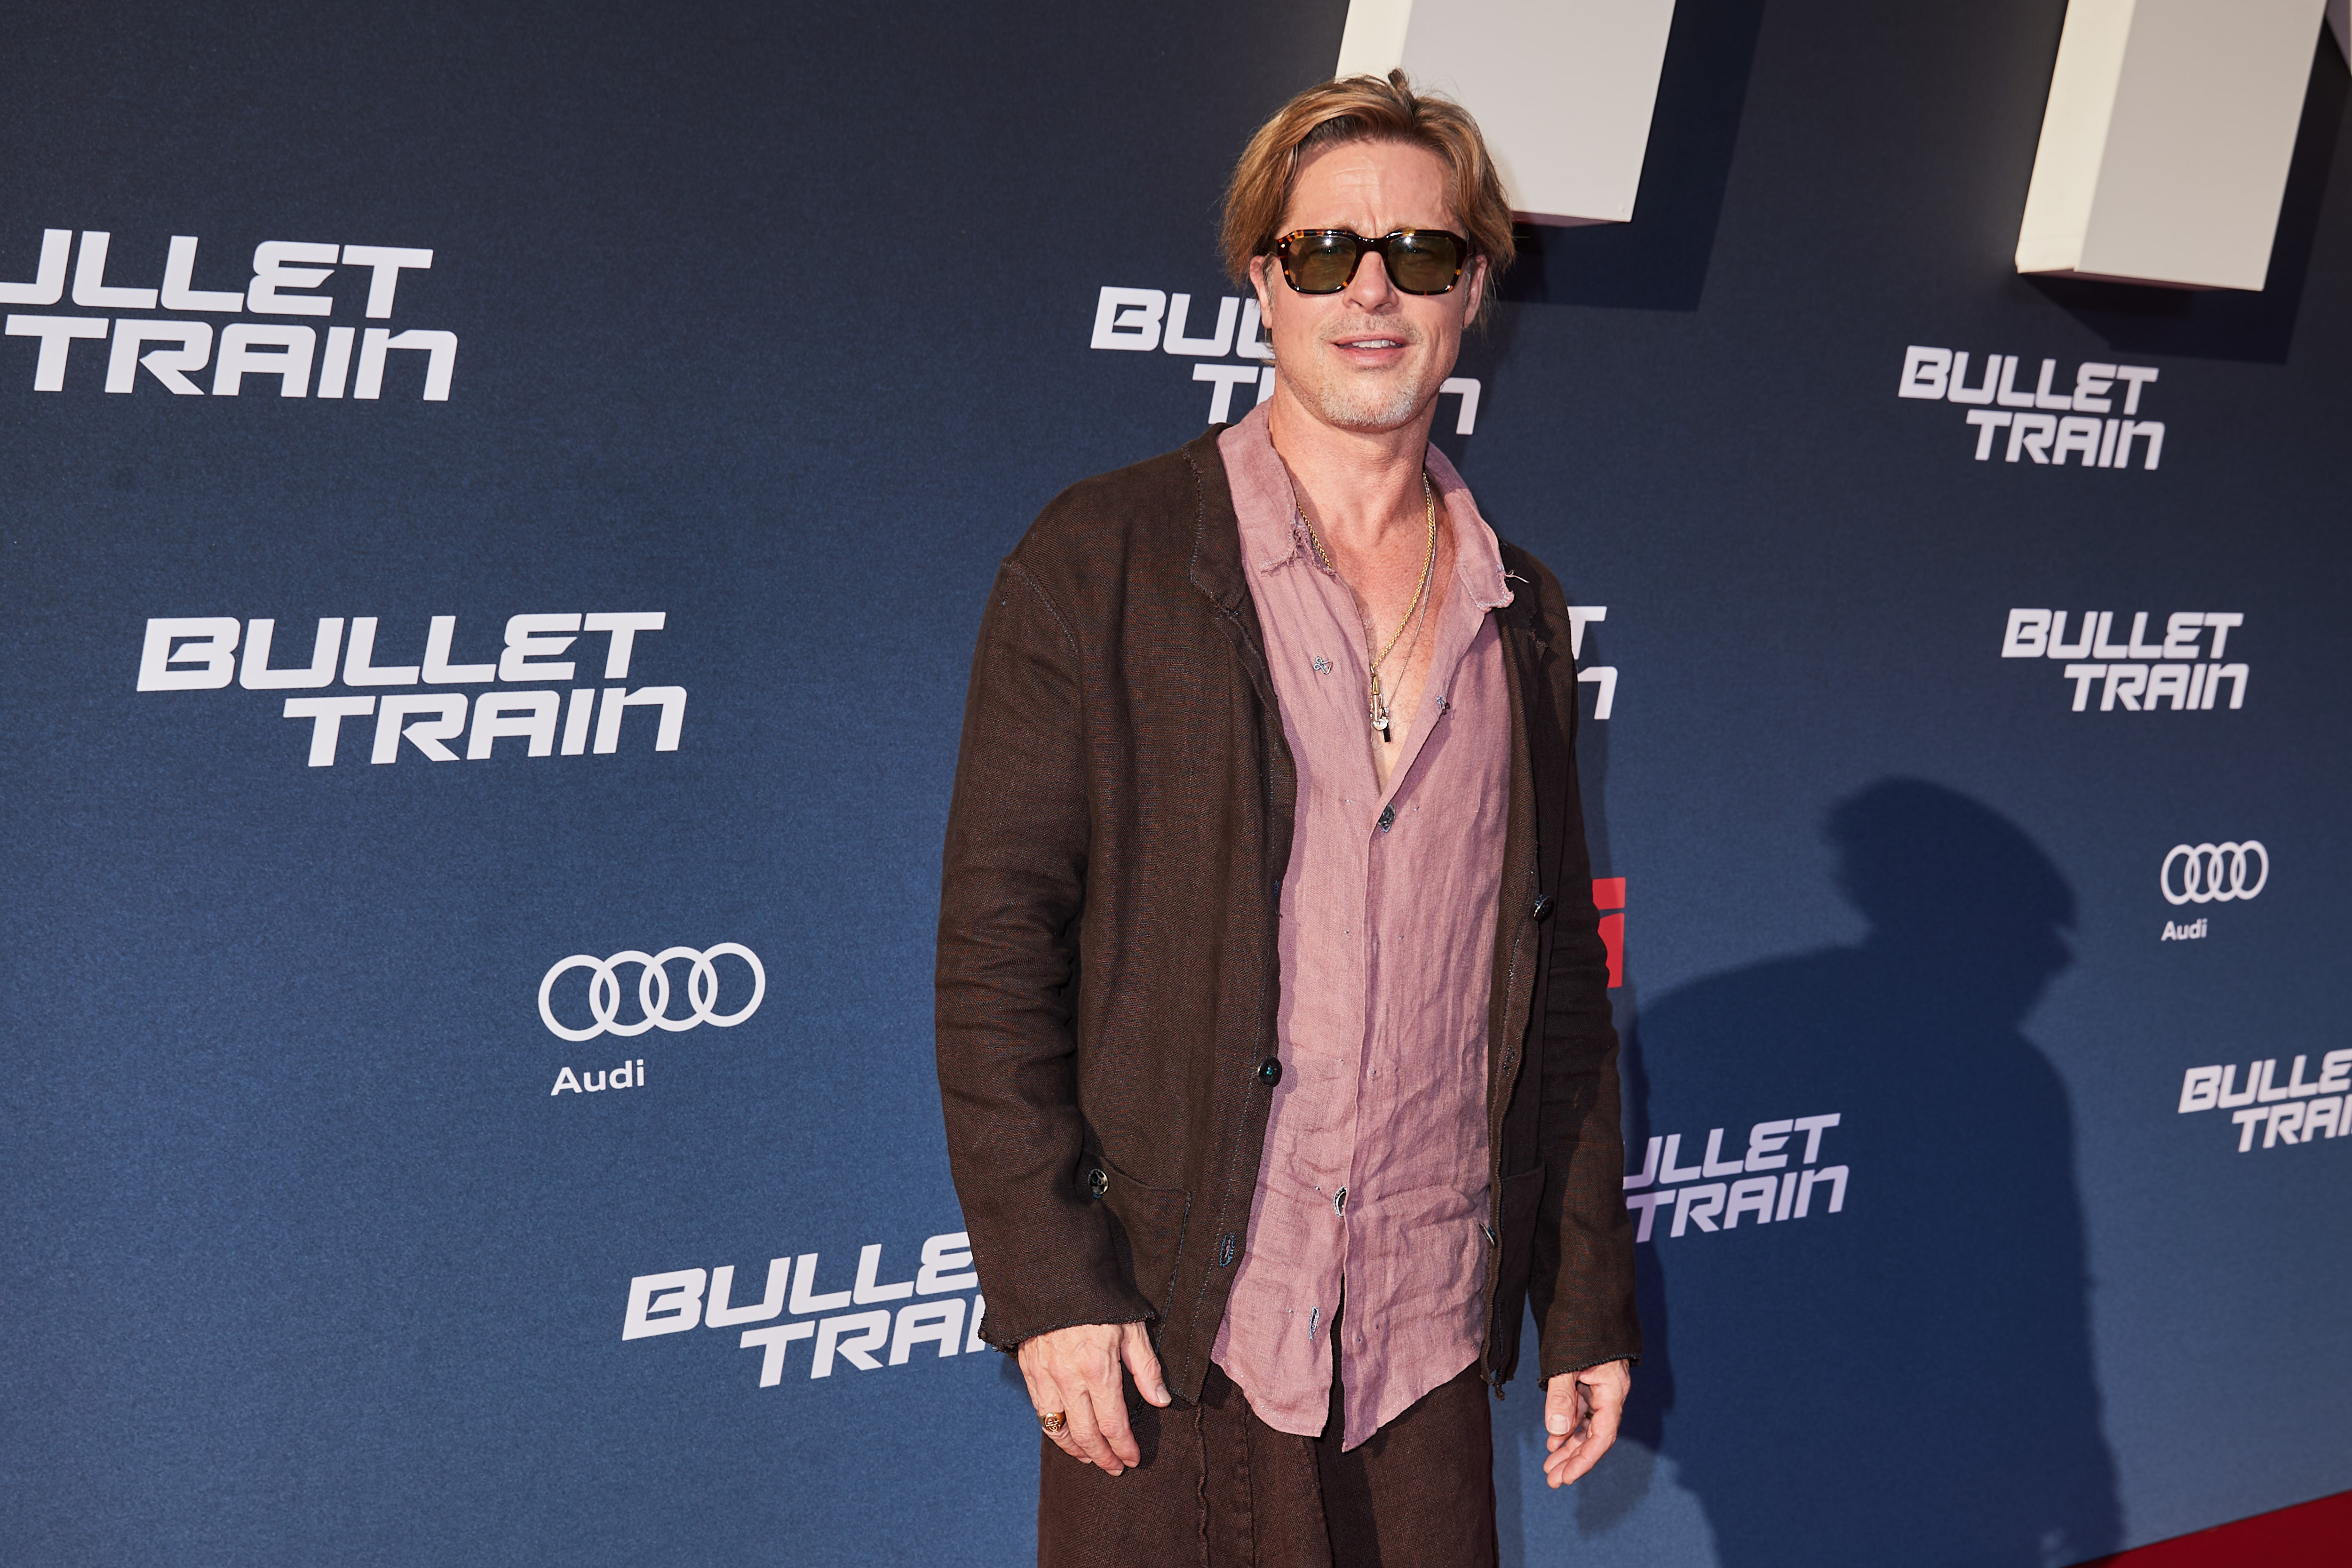 Brad Pitt Wore a Kilt and Combat Boots to His ‘Bullet Train' Premiere in Germany